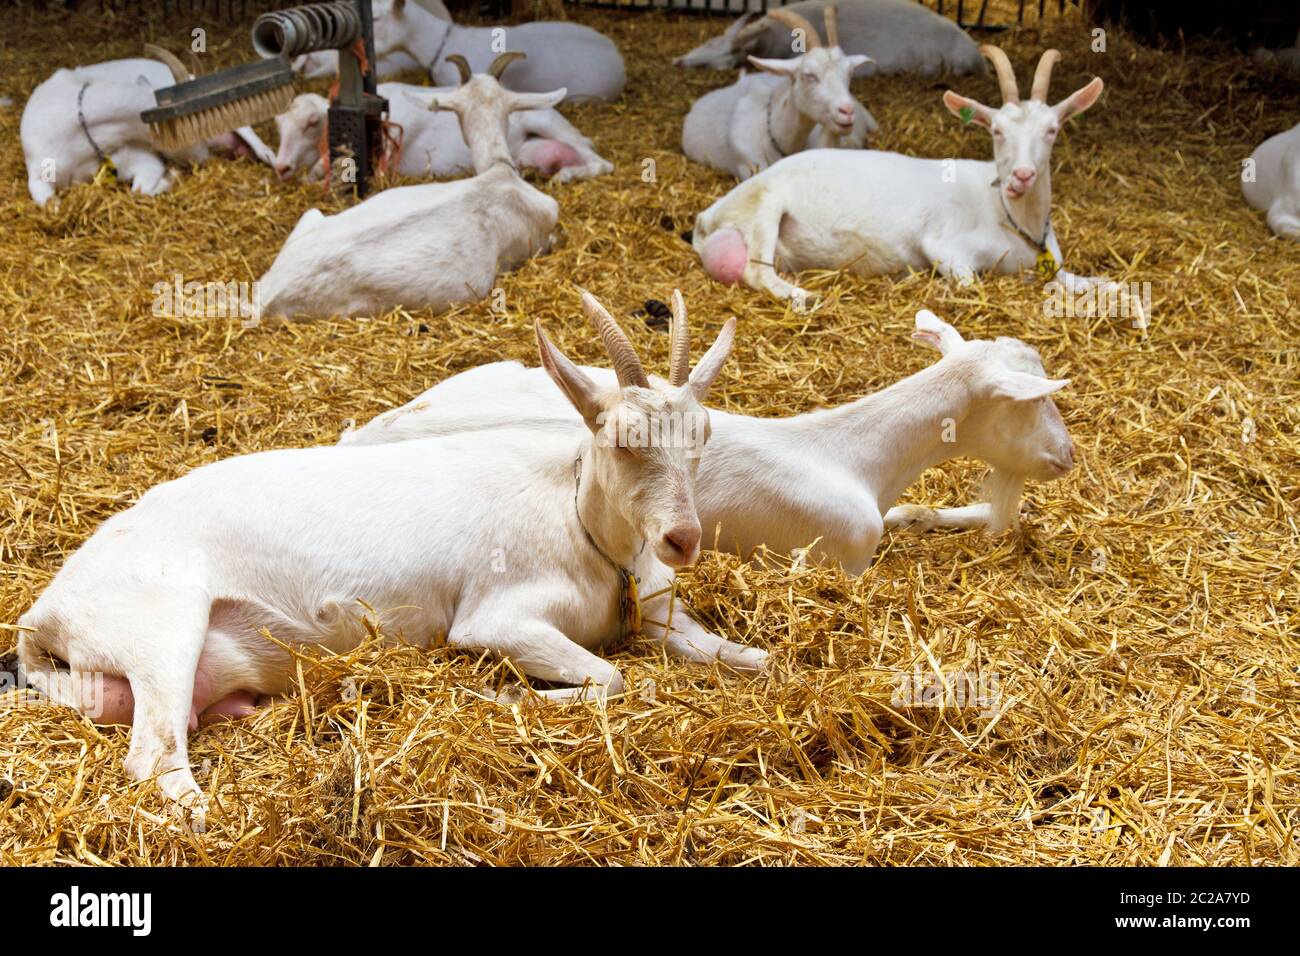 Dutch breed goats in straw at a petting zoo in the Netherlands Stock Photo